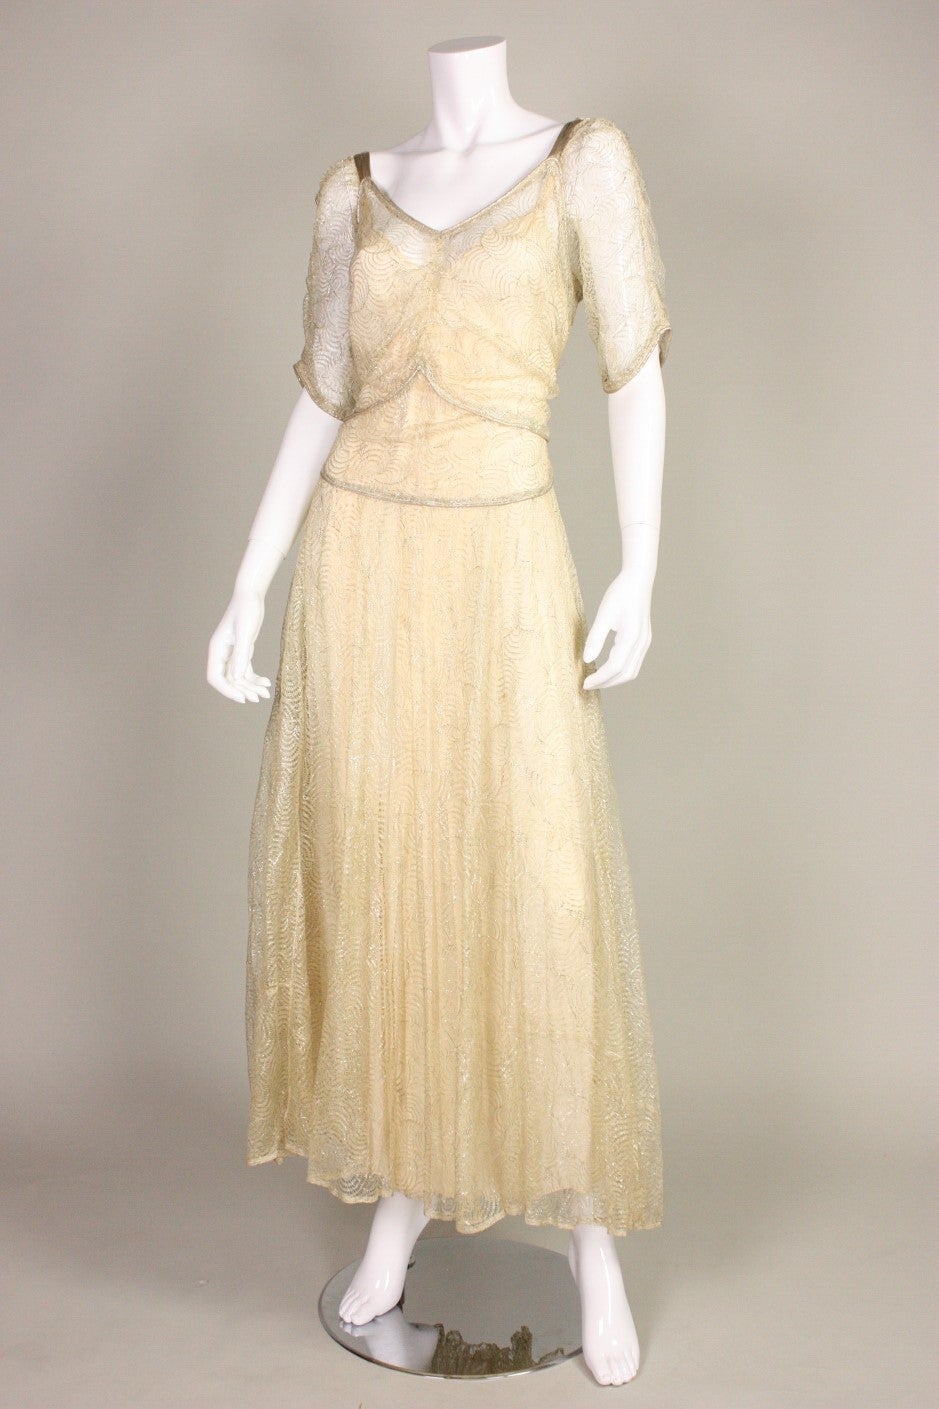 Vintage gown dates to the 1930's and is made of lame lace with an open weave.  Elbow-length sleeves.  Full skirt.  Center back snap closure.  Unlined, but comes with slip.

Measurements-

Bust: 32-36